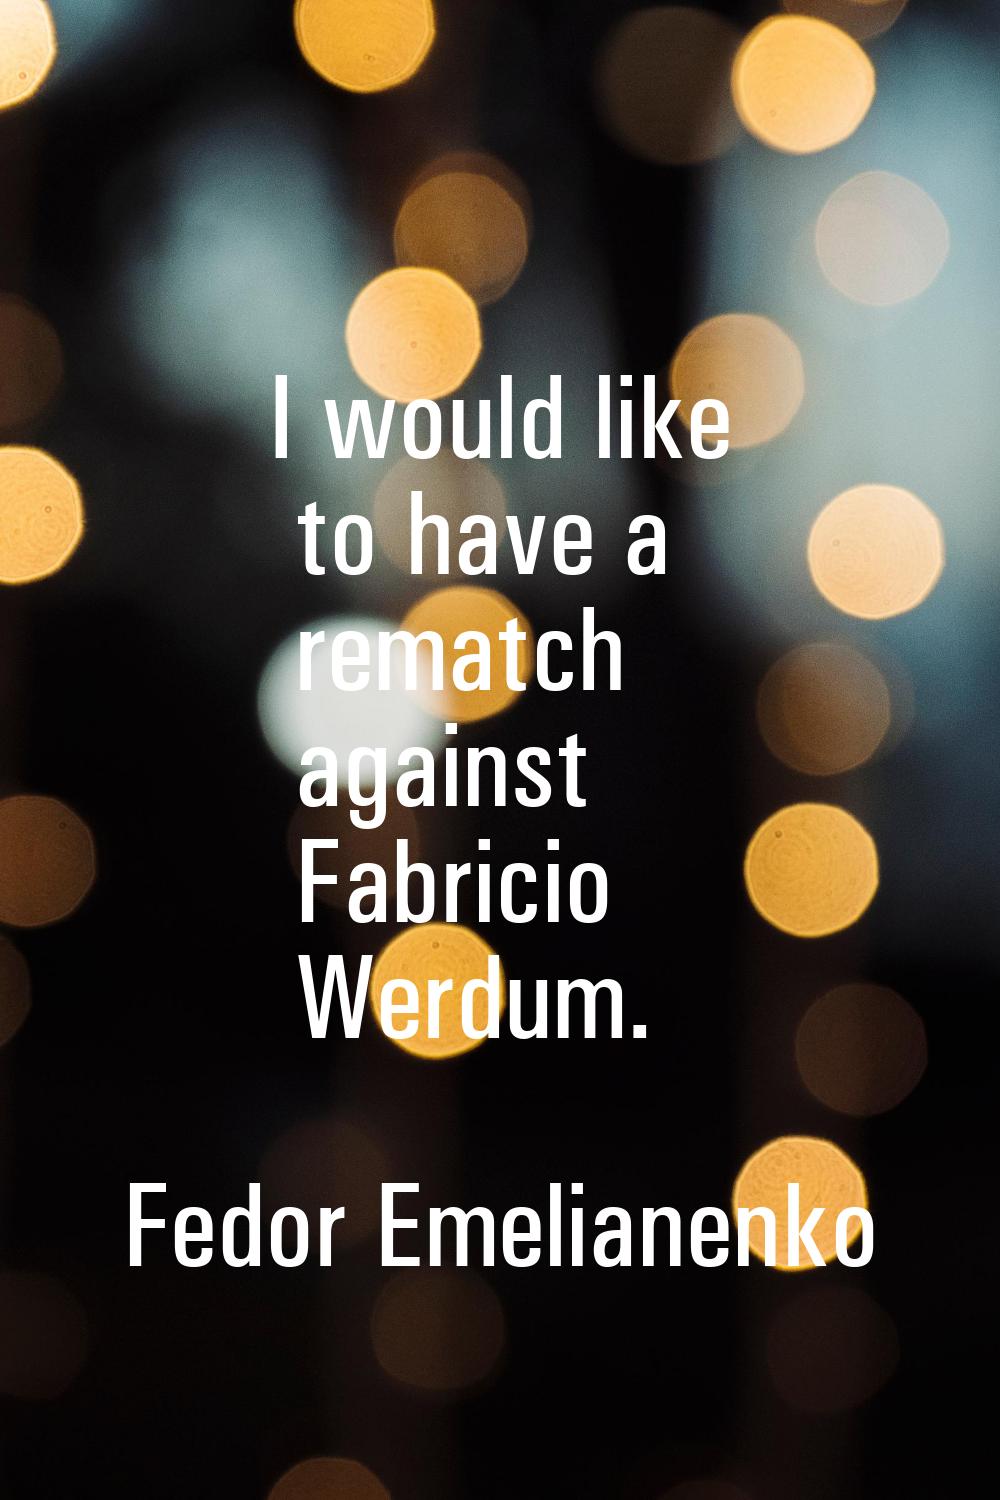 I would like to have a rematch against Fabricio Werdum.